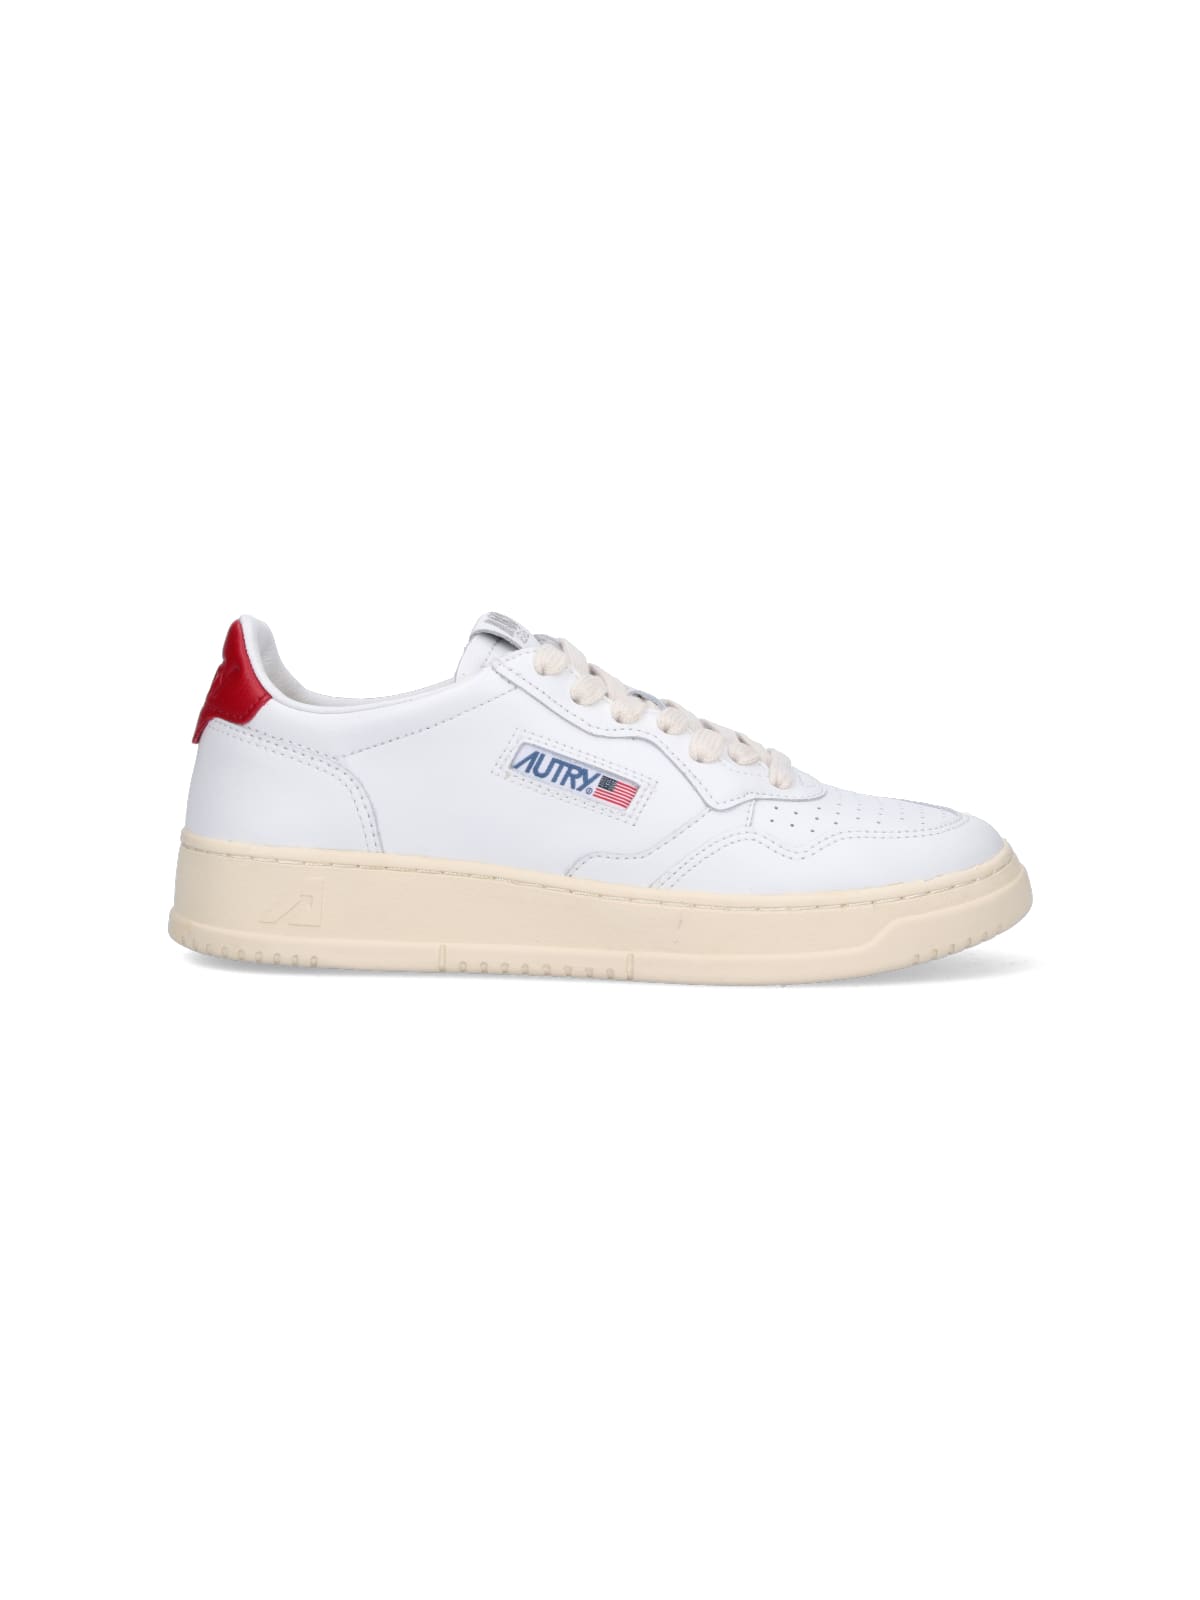 Autry Low Sneakers Medalist In Bianco+rosso